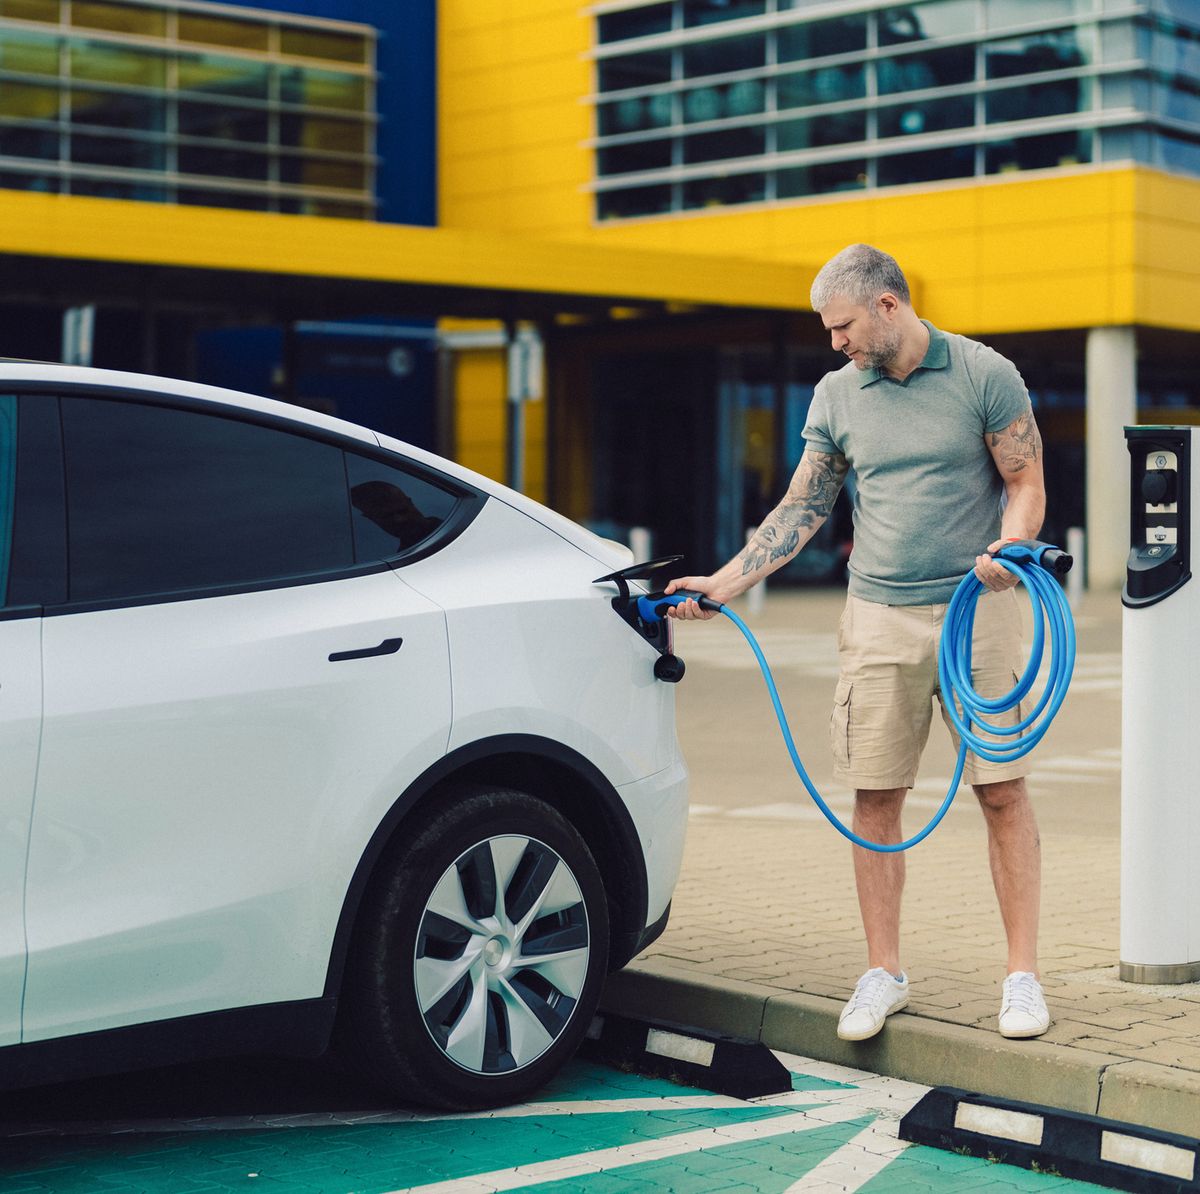 Here's why many electric vehicles are so expensive